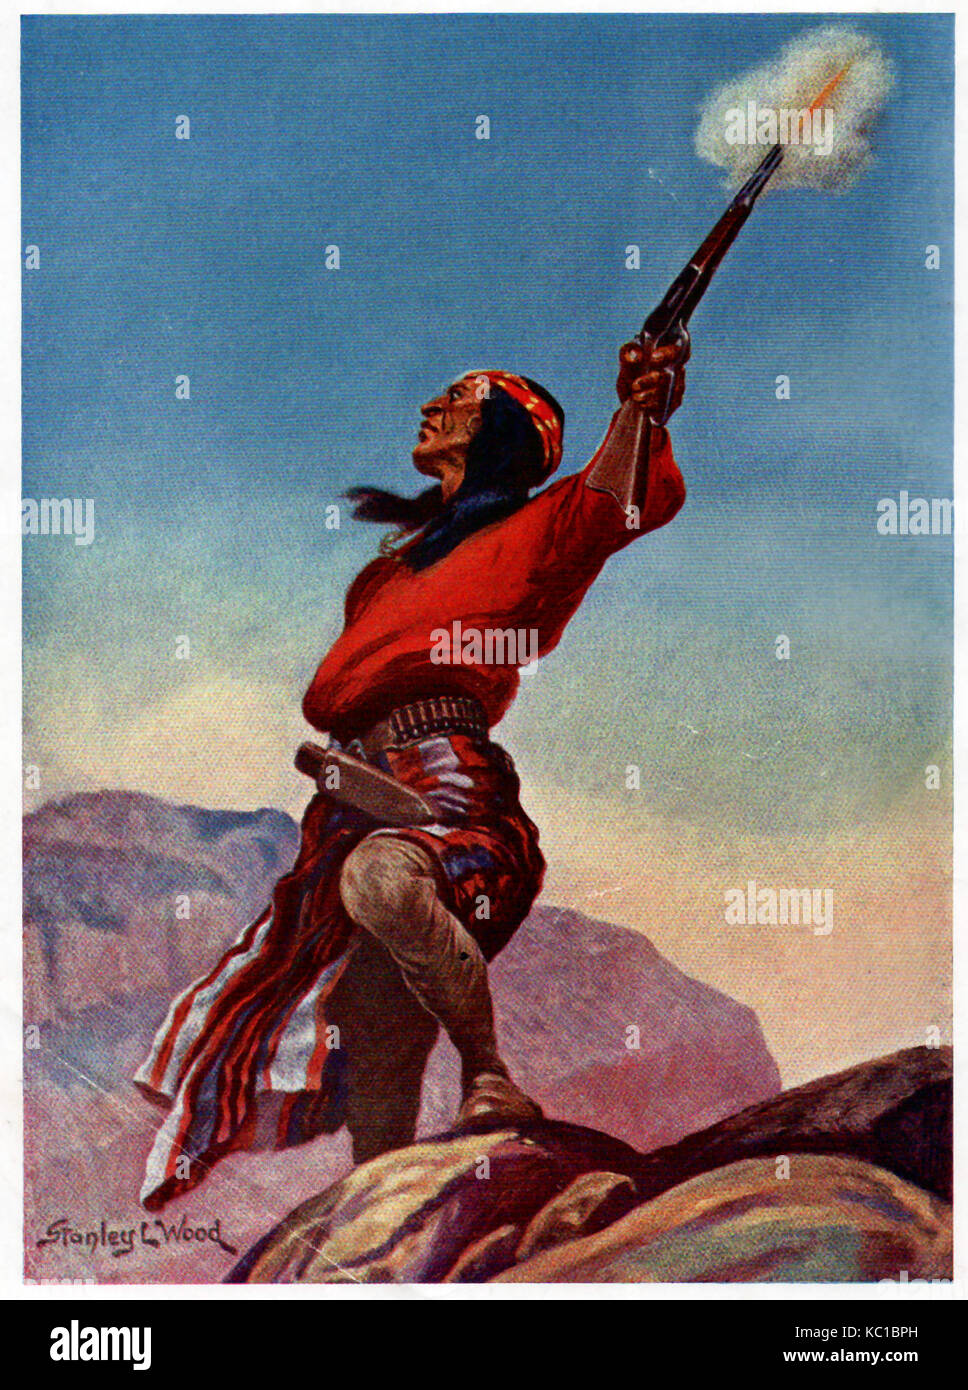 Illustration of a native american Indian from the Boy's Own Annual 1932-33 (UK) Stock Photo